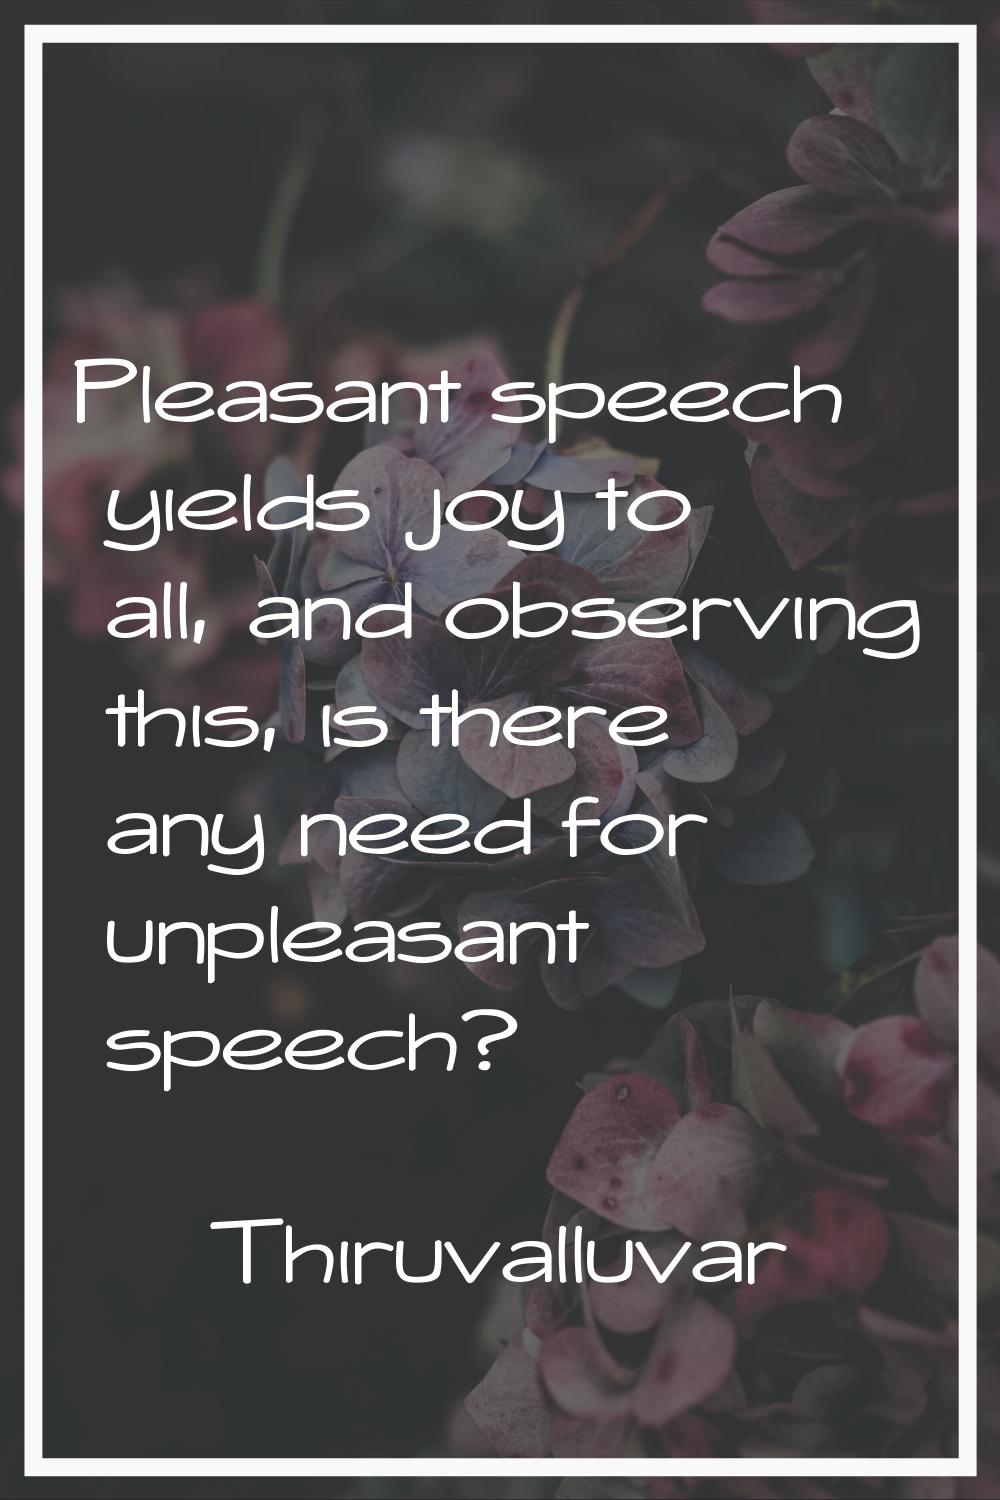 Pleasant speech yields joy to all, and observing this, is there any need for unpleasant speech?